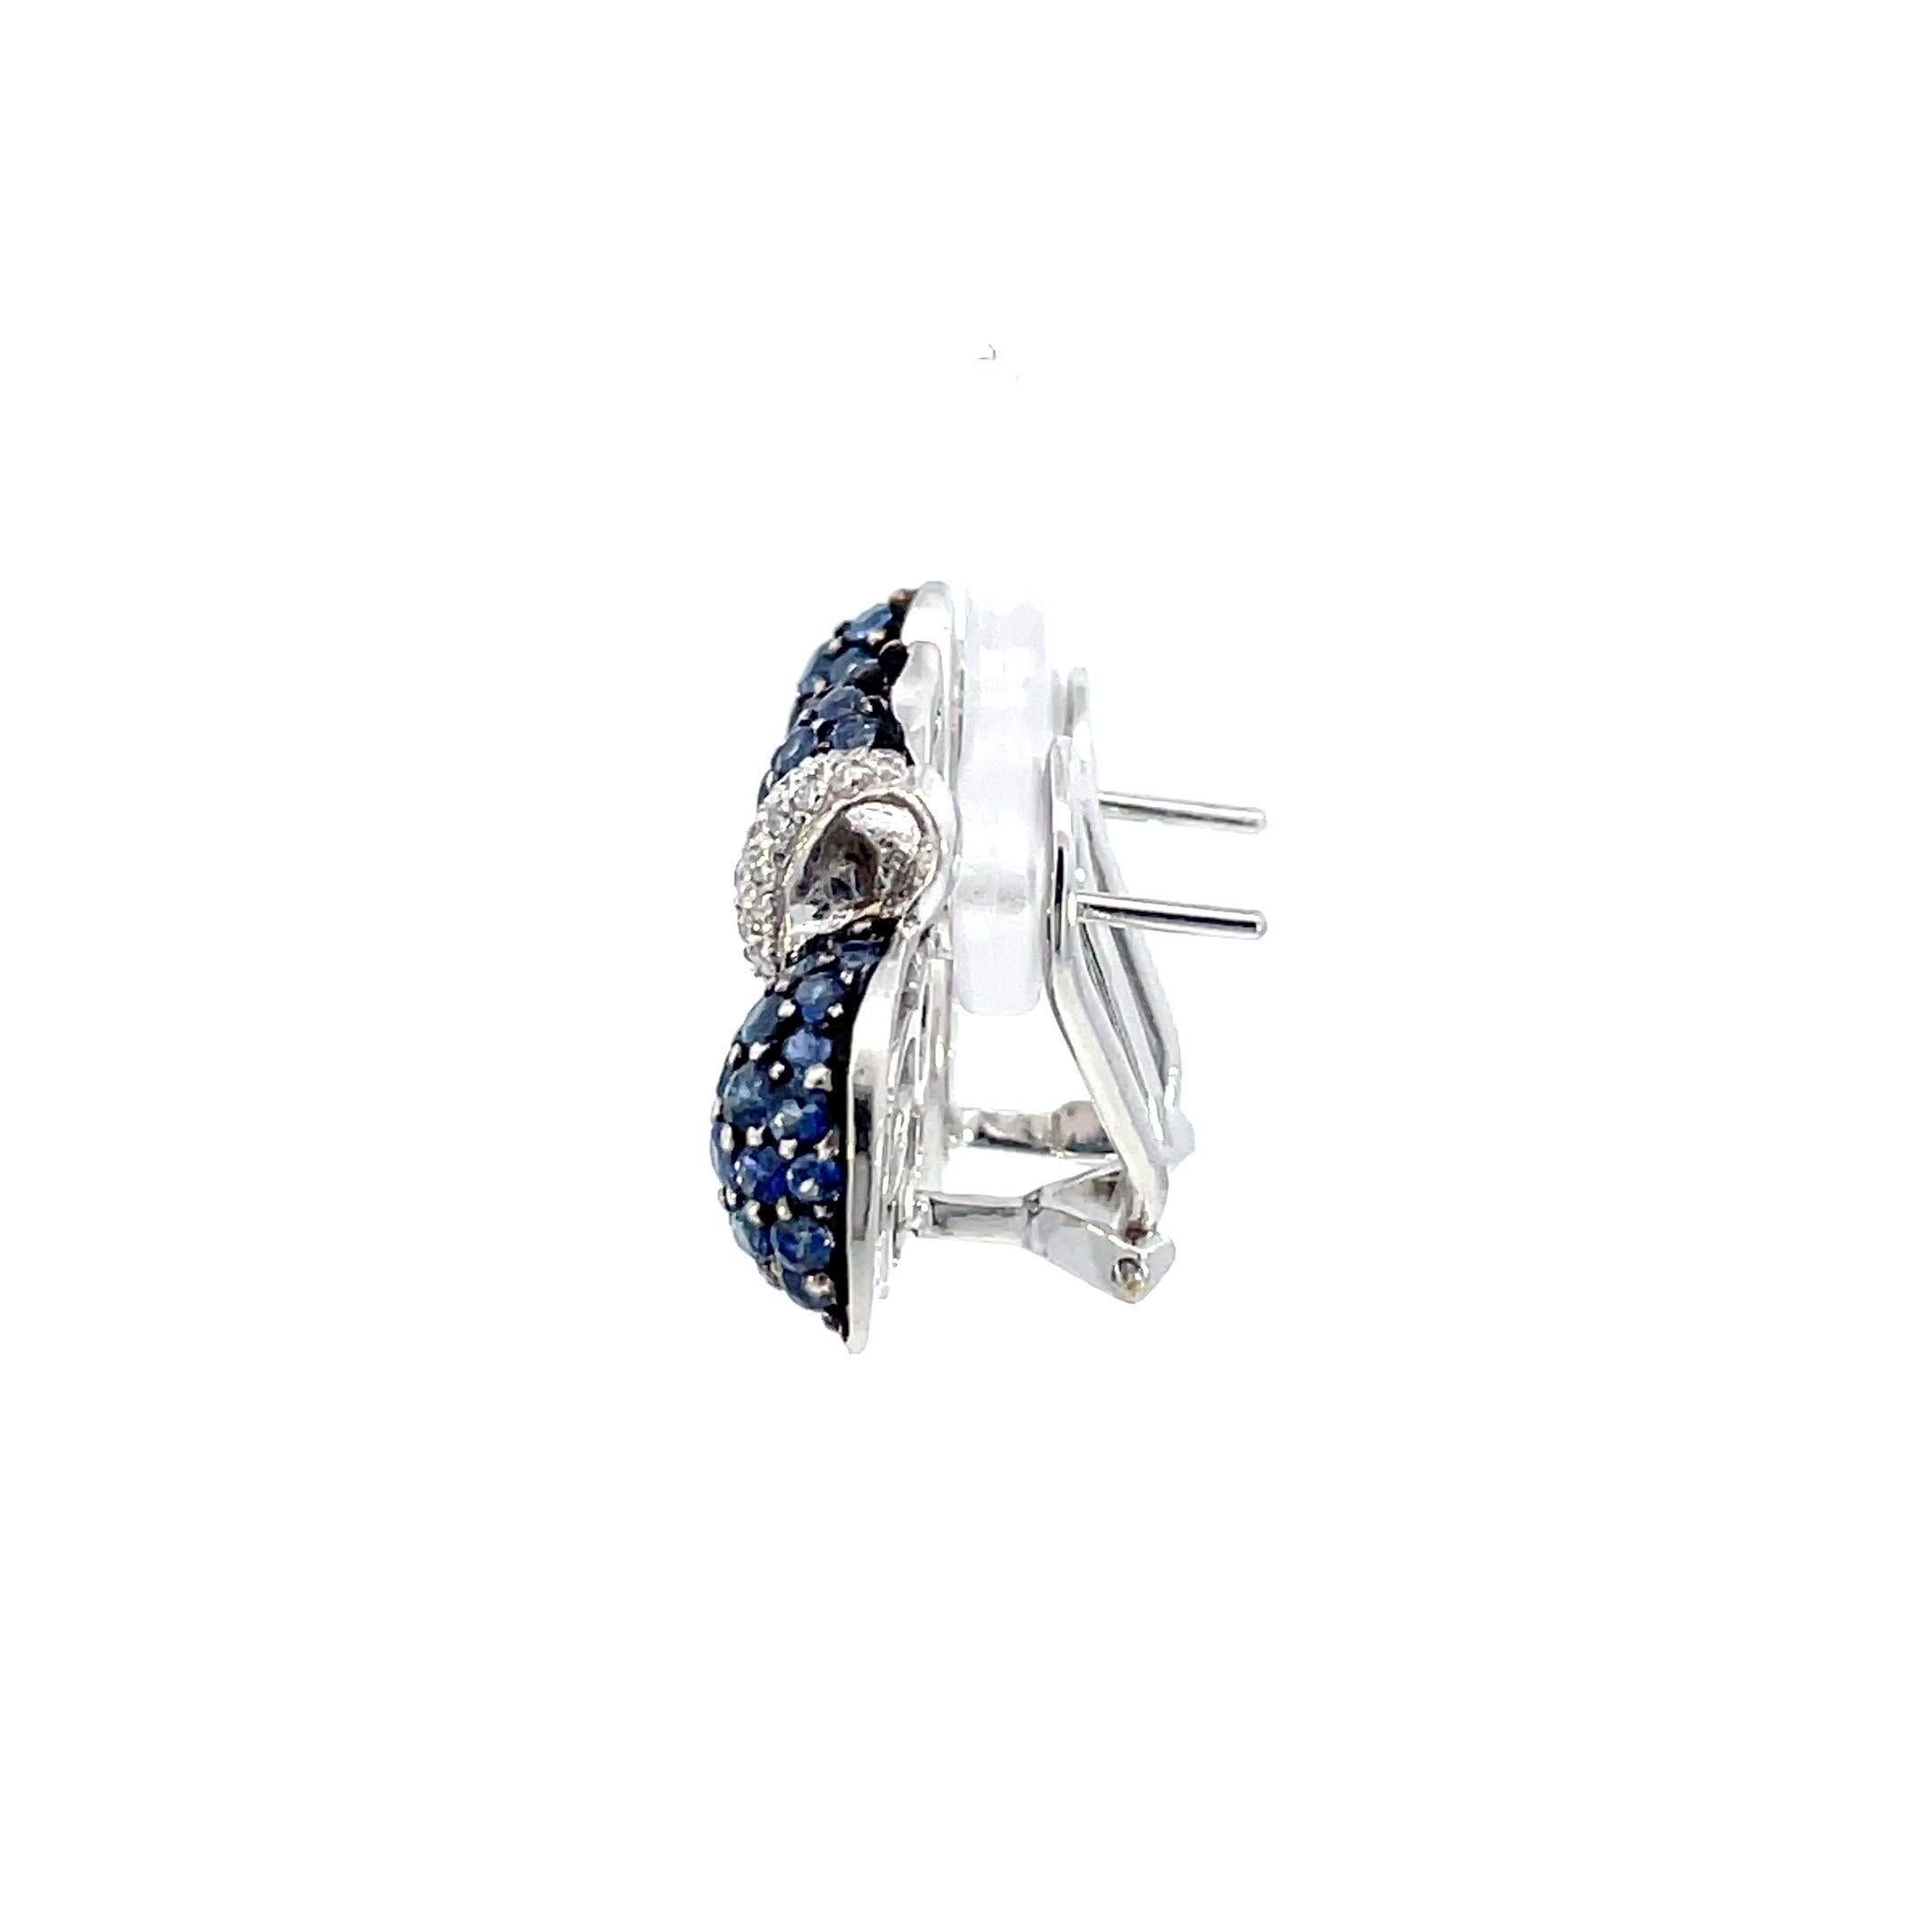 A large pair of natural blue sapphire and natural diamond earrings set in white gold highlighted with a black rhodium finish straight post and omega system.

40 Brilliant cut natural diamonds weighing 0.30ct total weight, quality G/VS

128 Natural